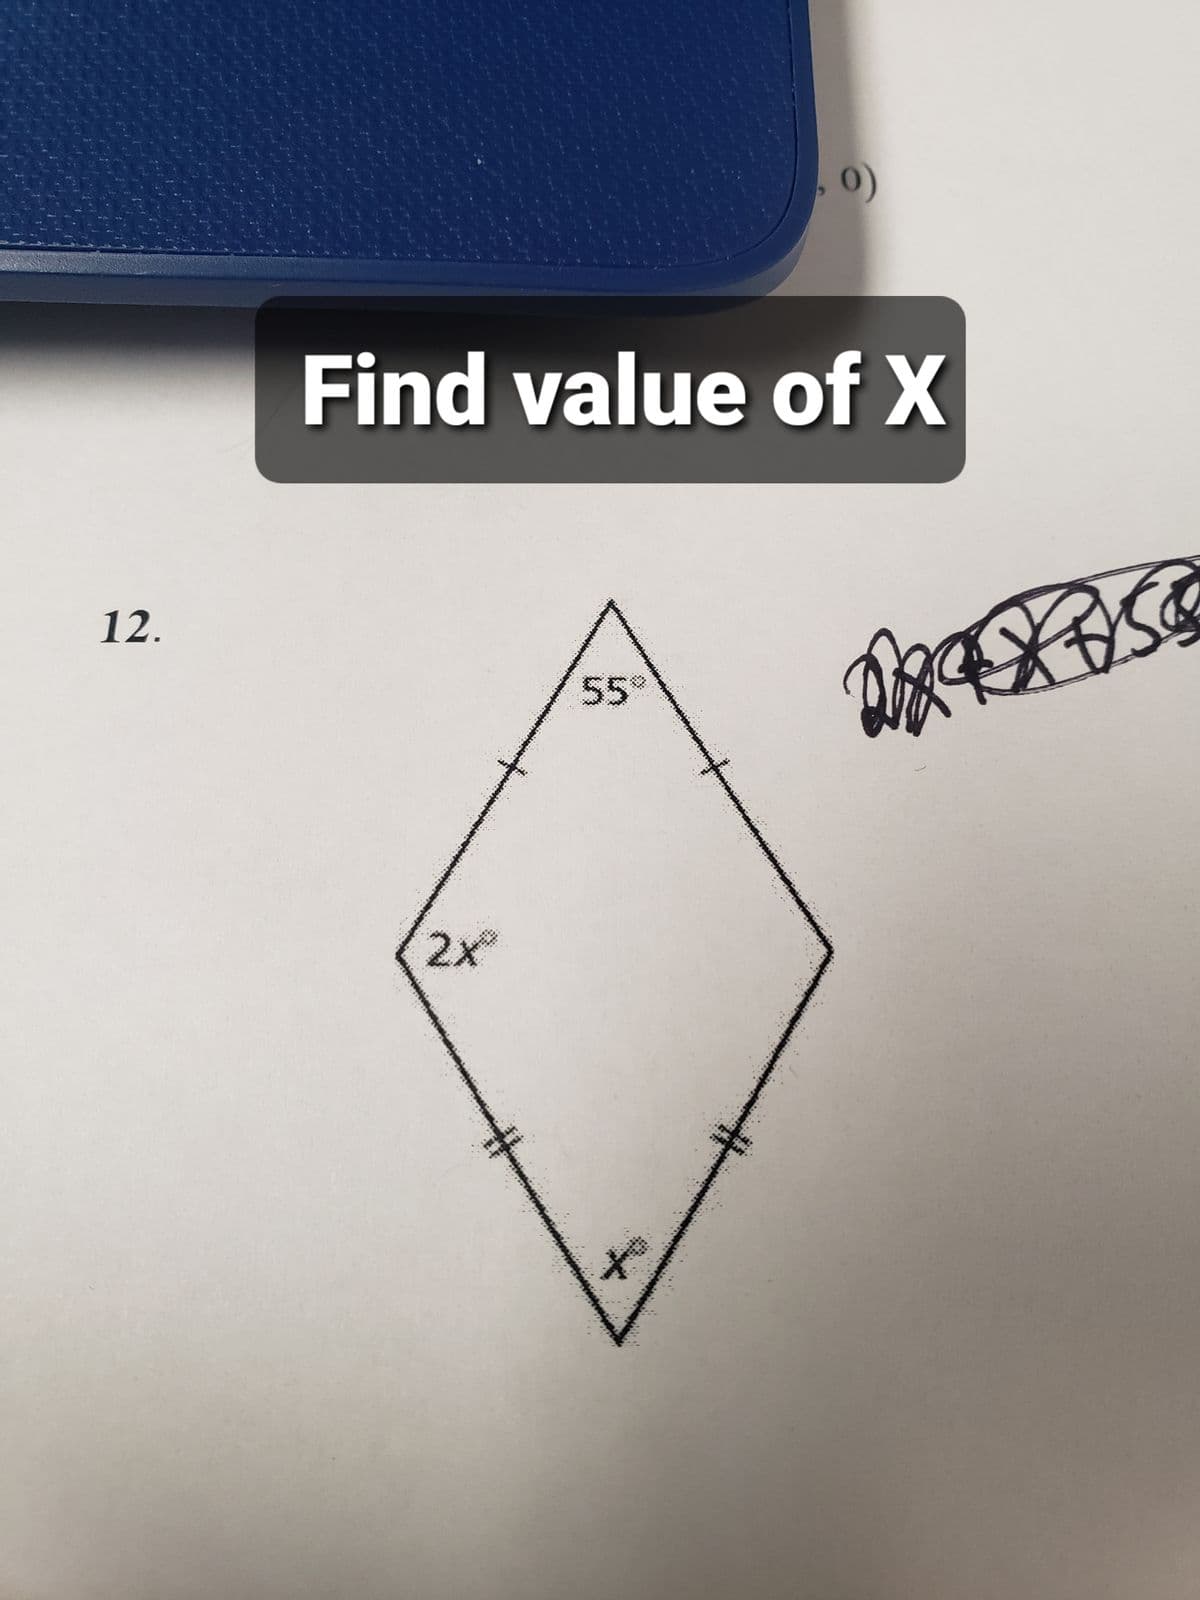 12.
0)
Find value of X
55°
2X
+
OXAS